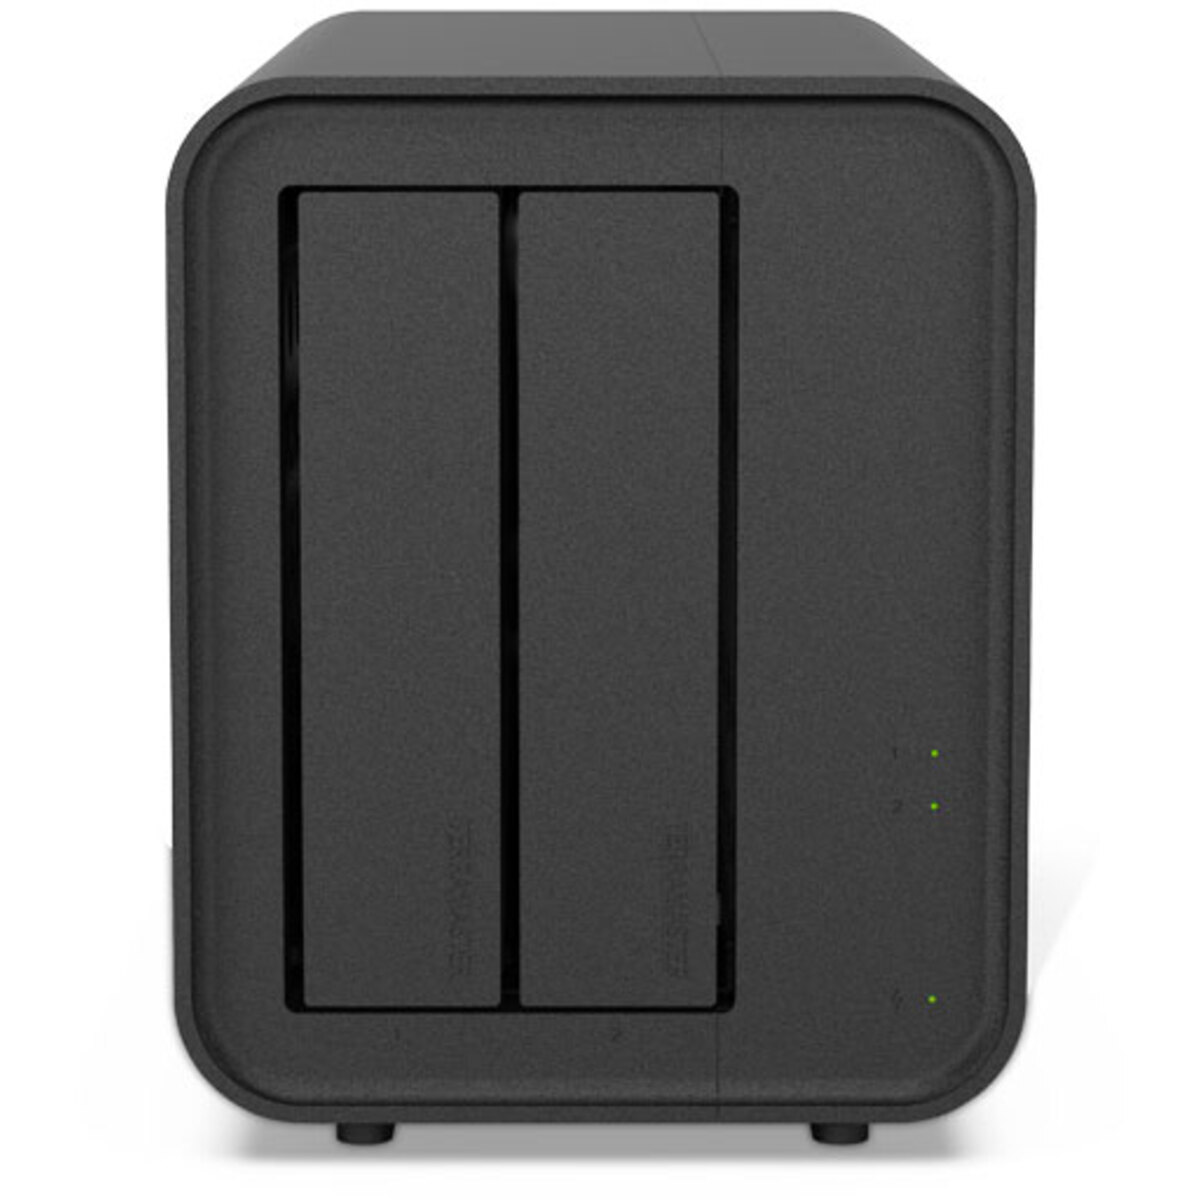 TerraMaster F2-424 32tb 2-Bay Desktop Multimedia / Power User / Business NAS - Network Attached Storage Device 2x16tb Seagate IronWolf Pro ST16000NT001 3.5 7200rpm SATA 6Gb/s HDD NAS Class Drives Installed - Burn-In Tested - ON SALE F2-424